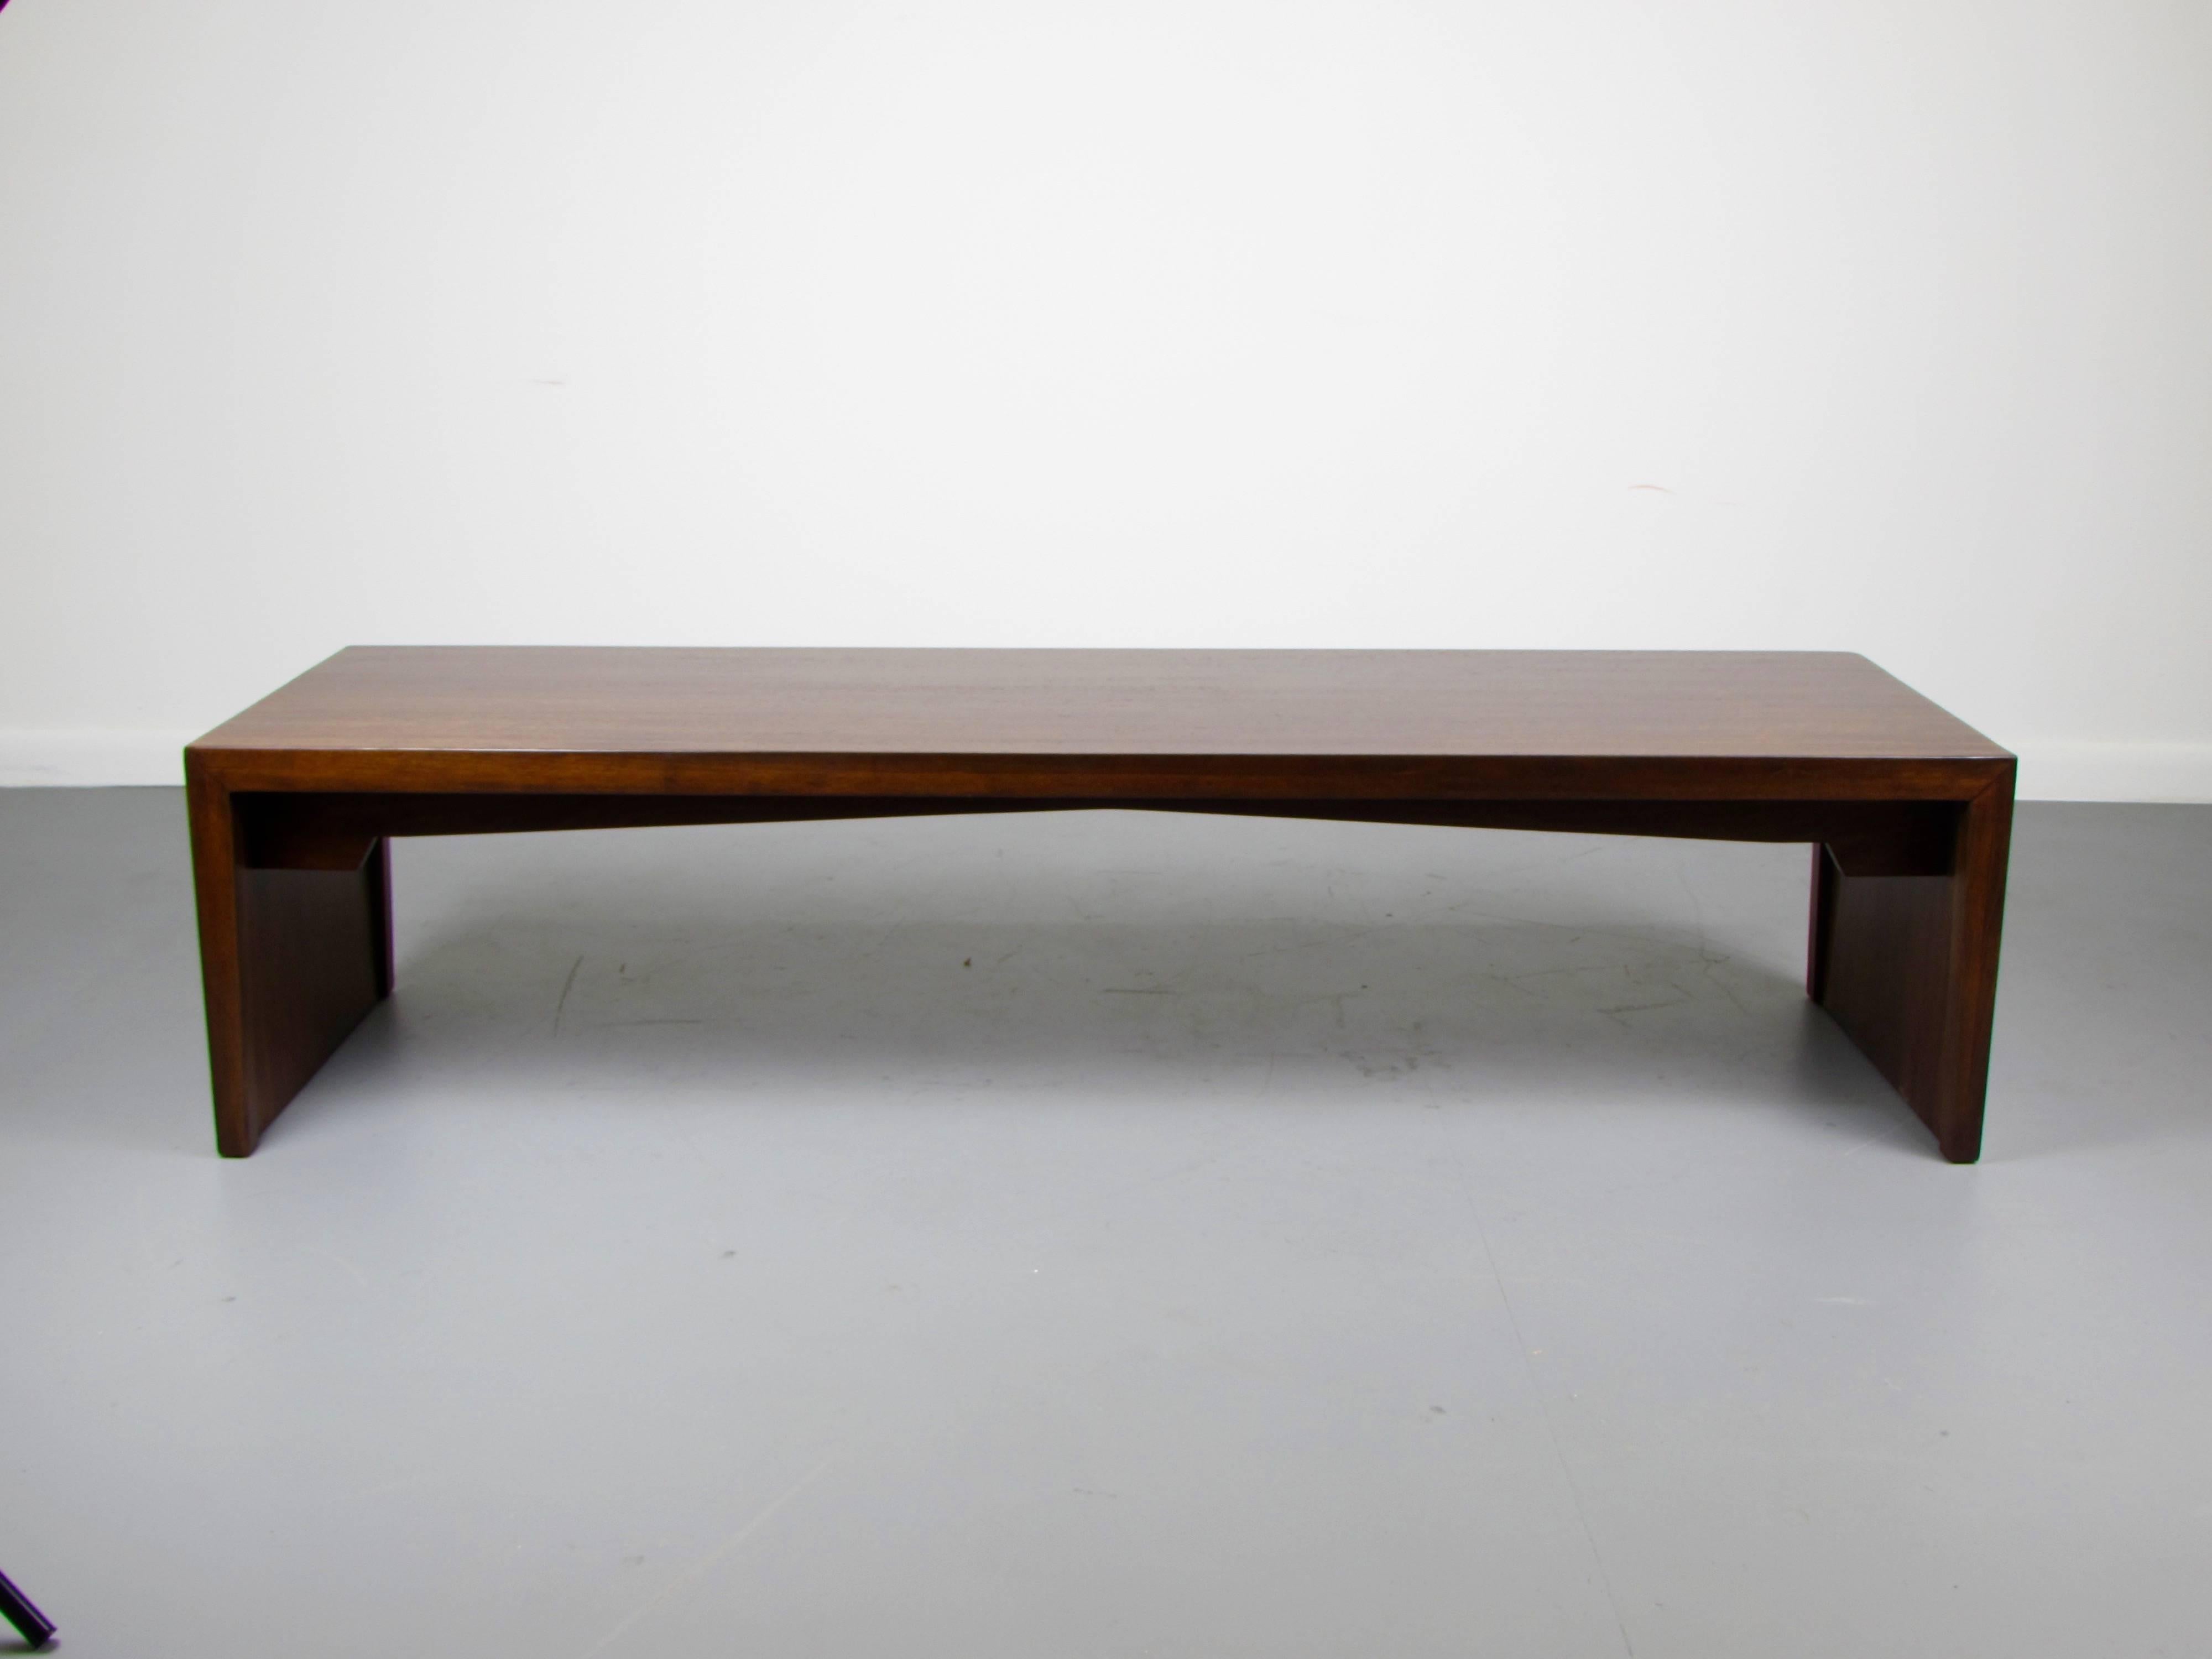 Handsome mahogany bench or coffee table from Milo Baughman's 